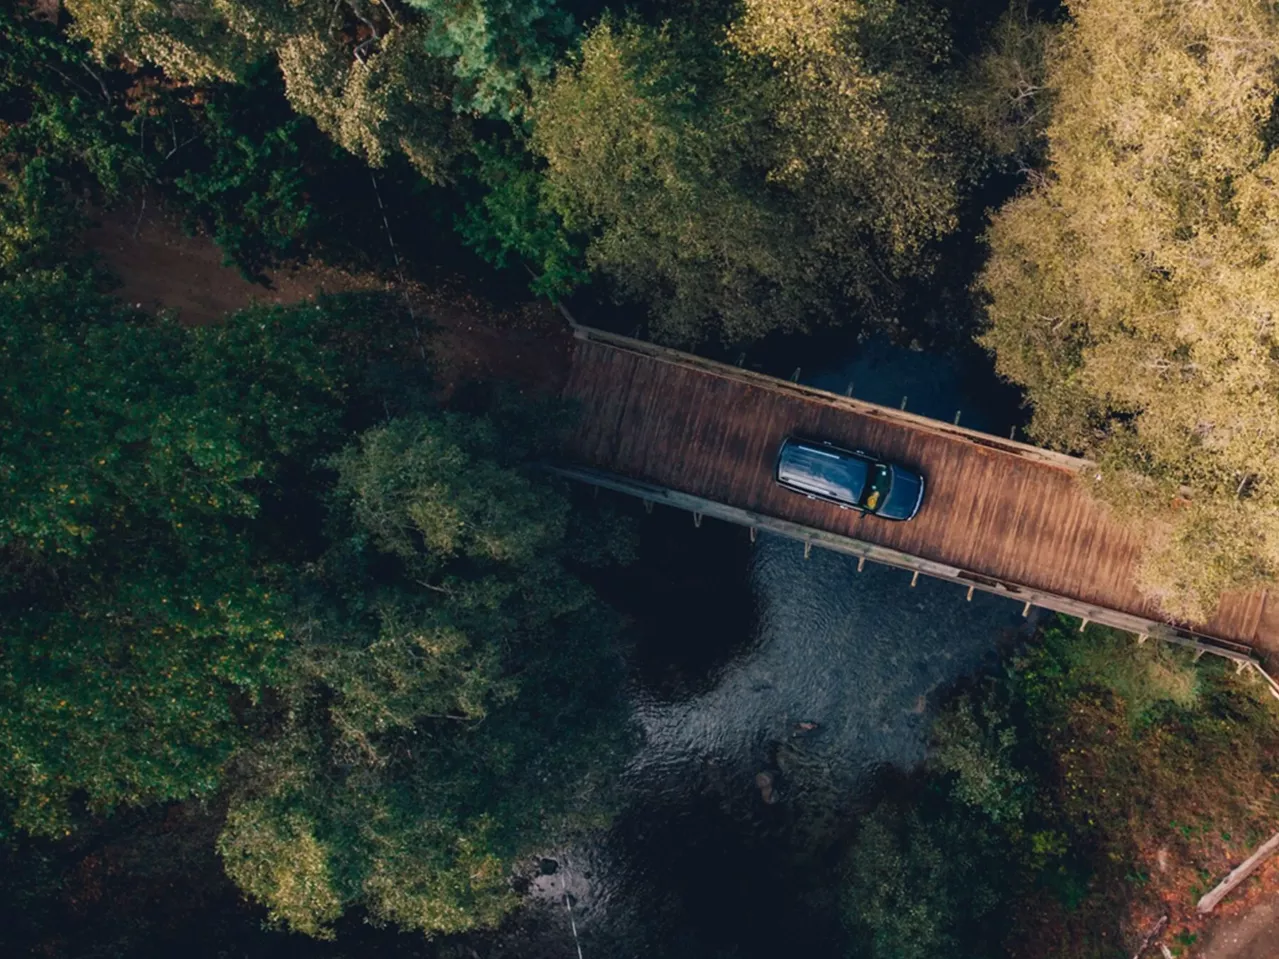 Aerial view of a blue car crossing a narrow wooden bridge over a river, surrounded by dense green trees.